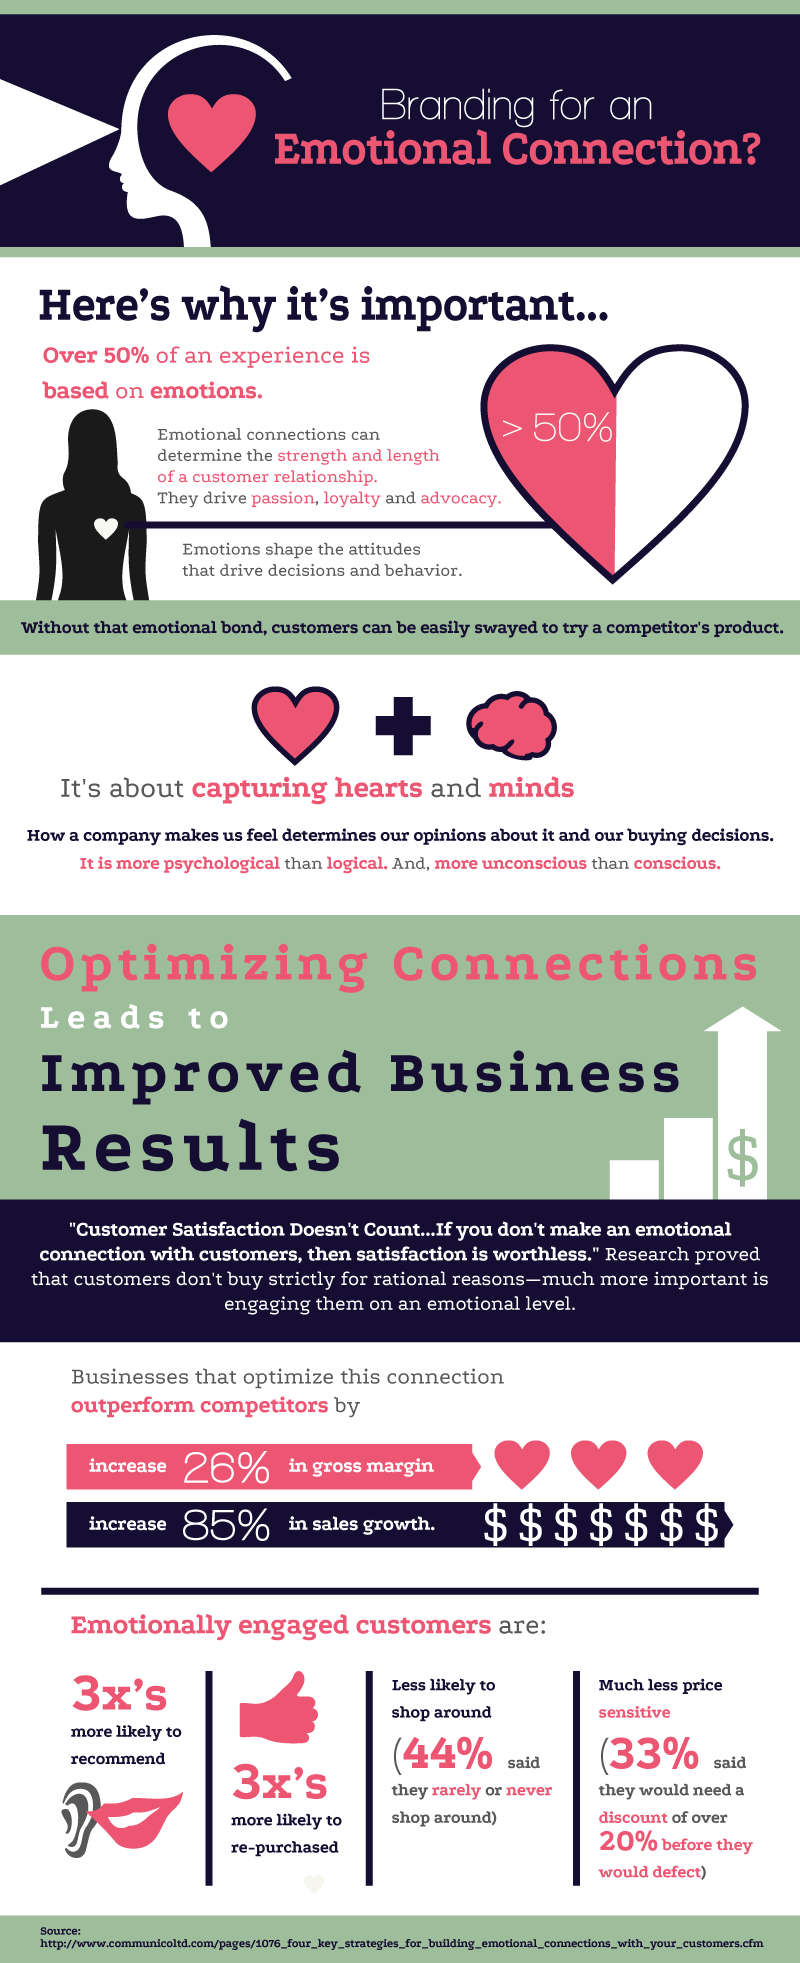 Branding for an Emotional Connection [Infographic]